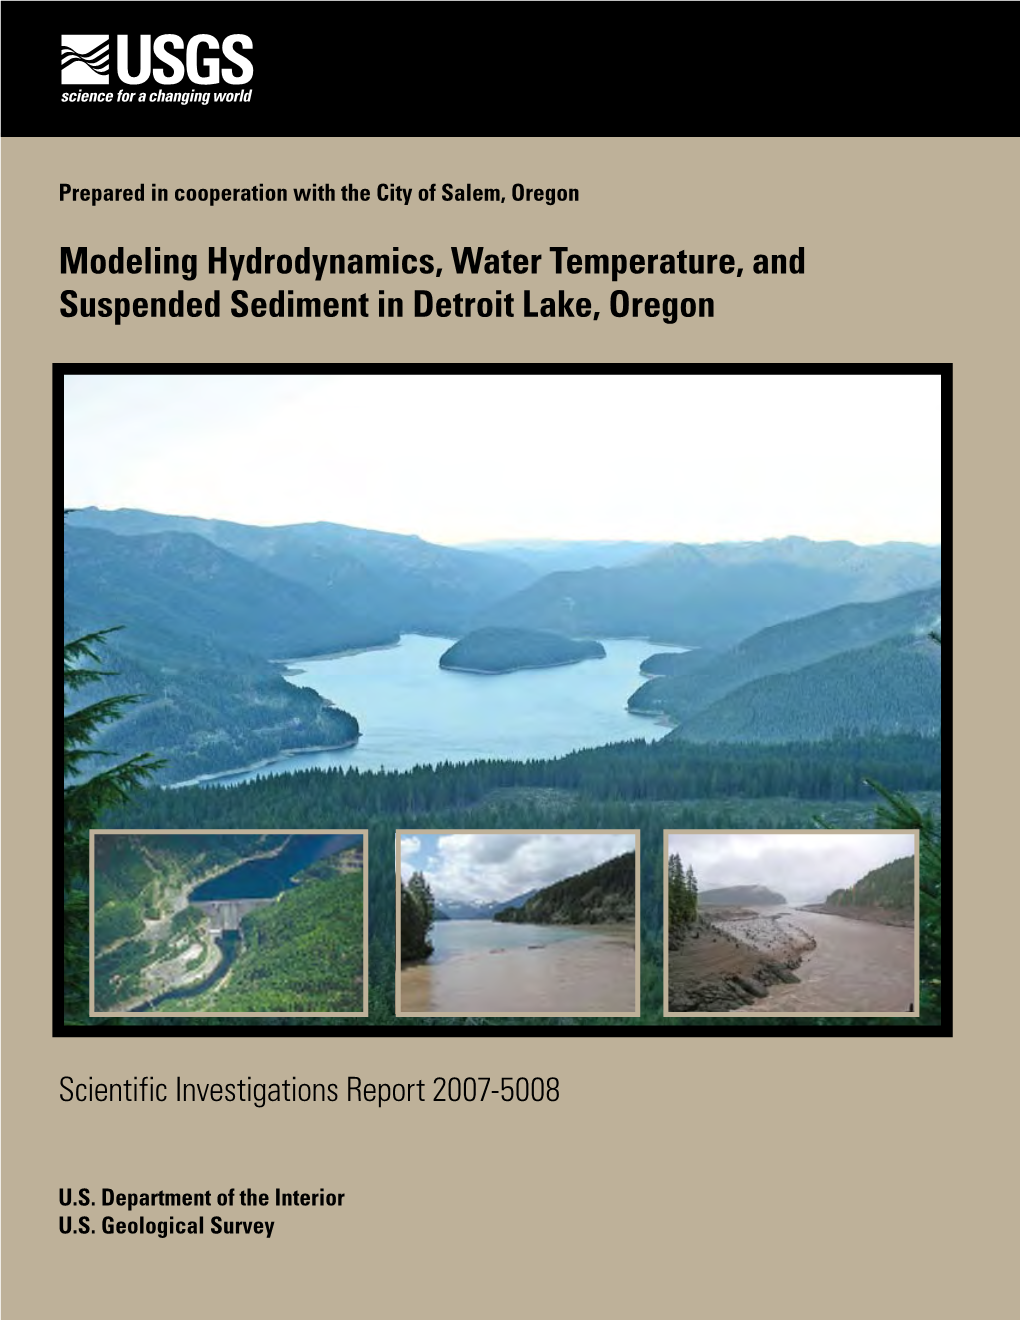 Modeling Hydrodynamics, Water Temperature, and Suspended Sediment in Detroit Lake, Oregon